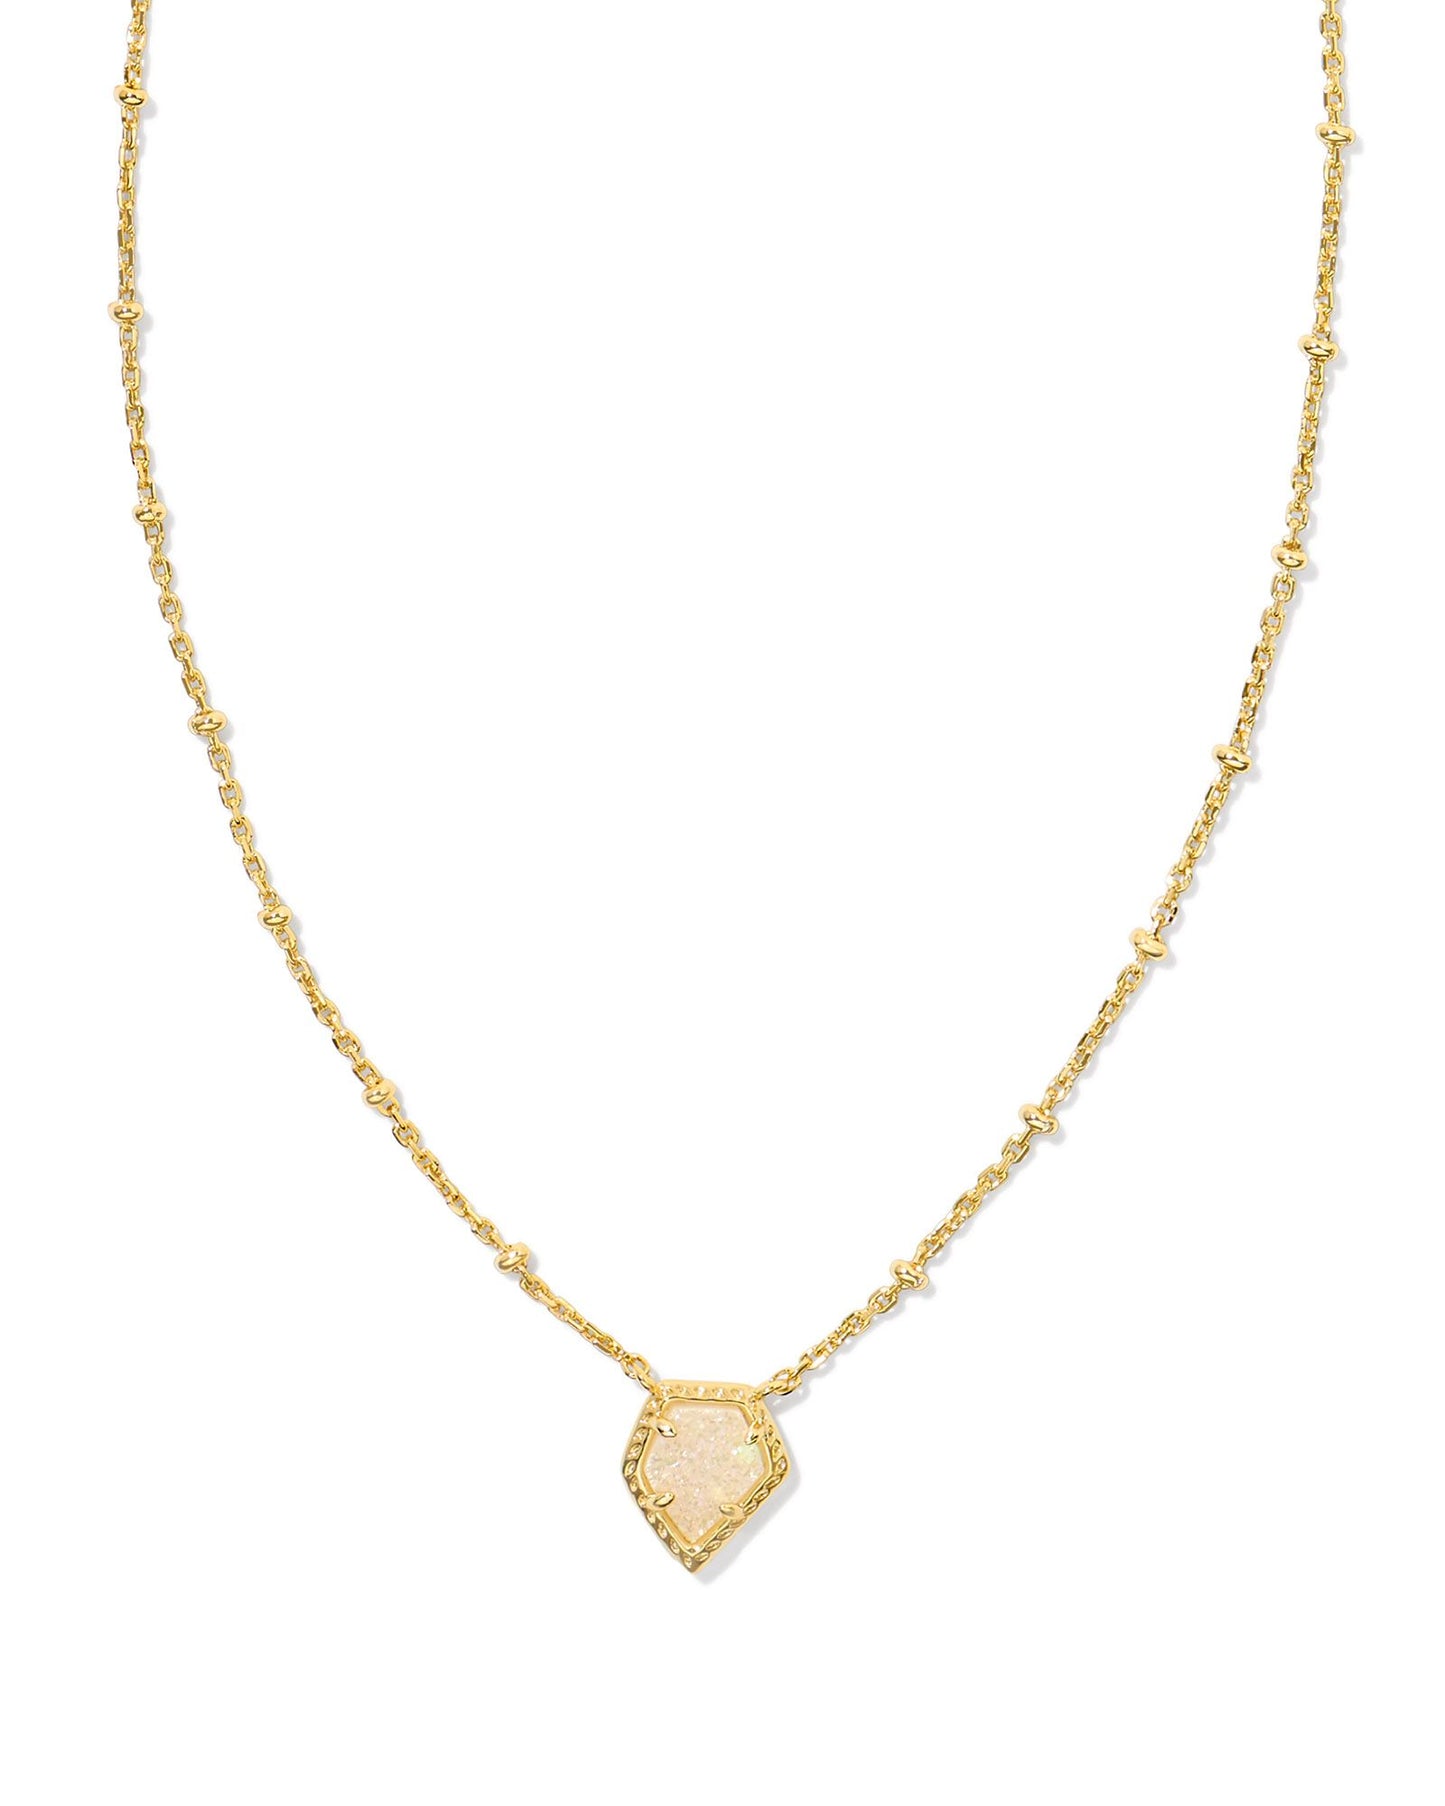 gold necklace with a detailed beaded chain, geometric shaped pendant, iridescent shaped stone